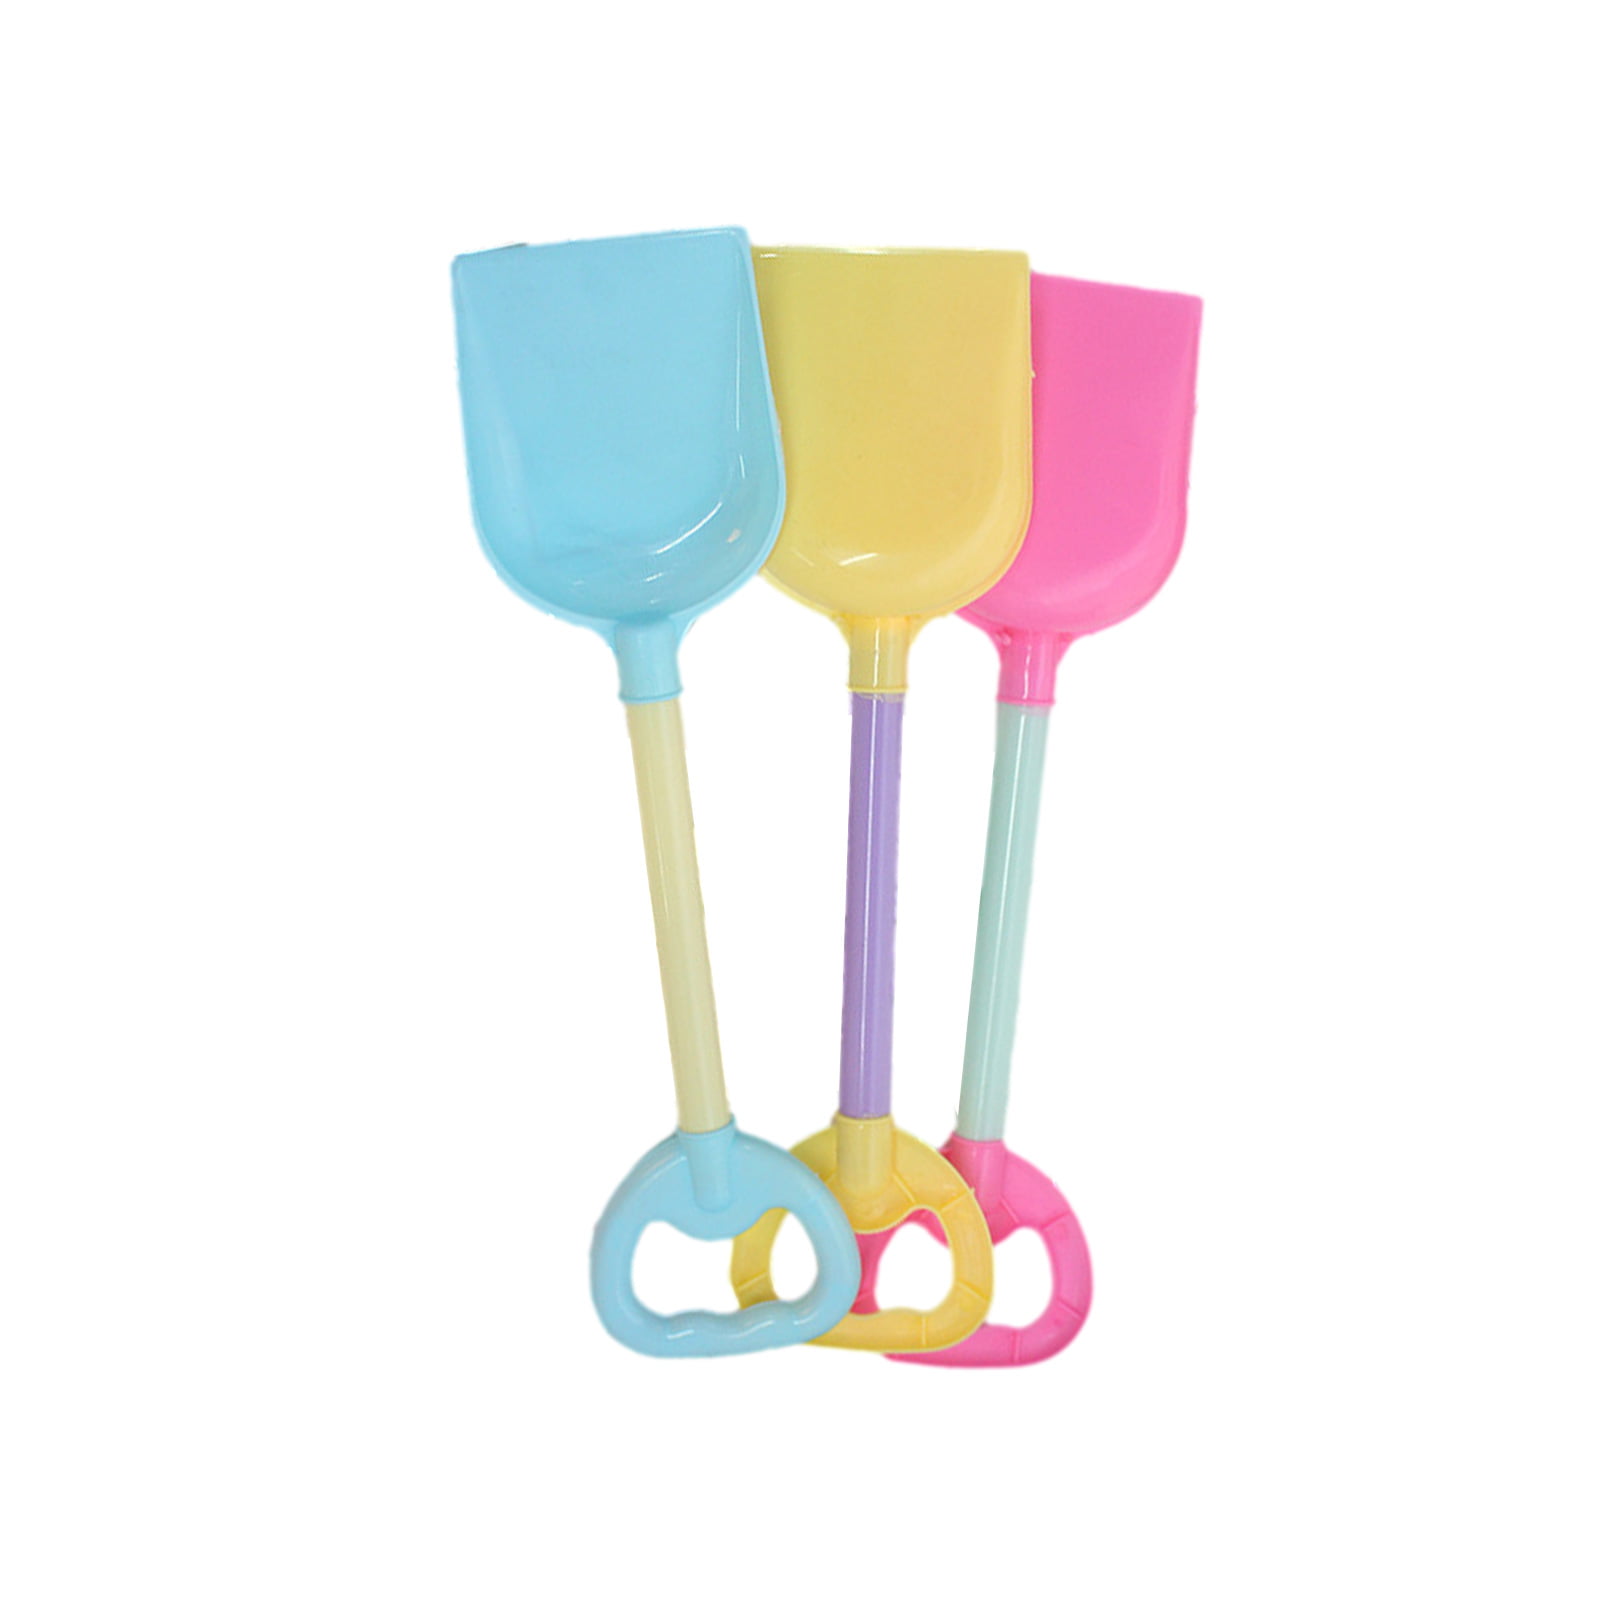 Beach Shovel Plastic Sand Scoopers with Handle for Digging at The Beach Plastic Sand Shovel Toys Children Water Sand and Garden Digging Tool 